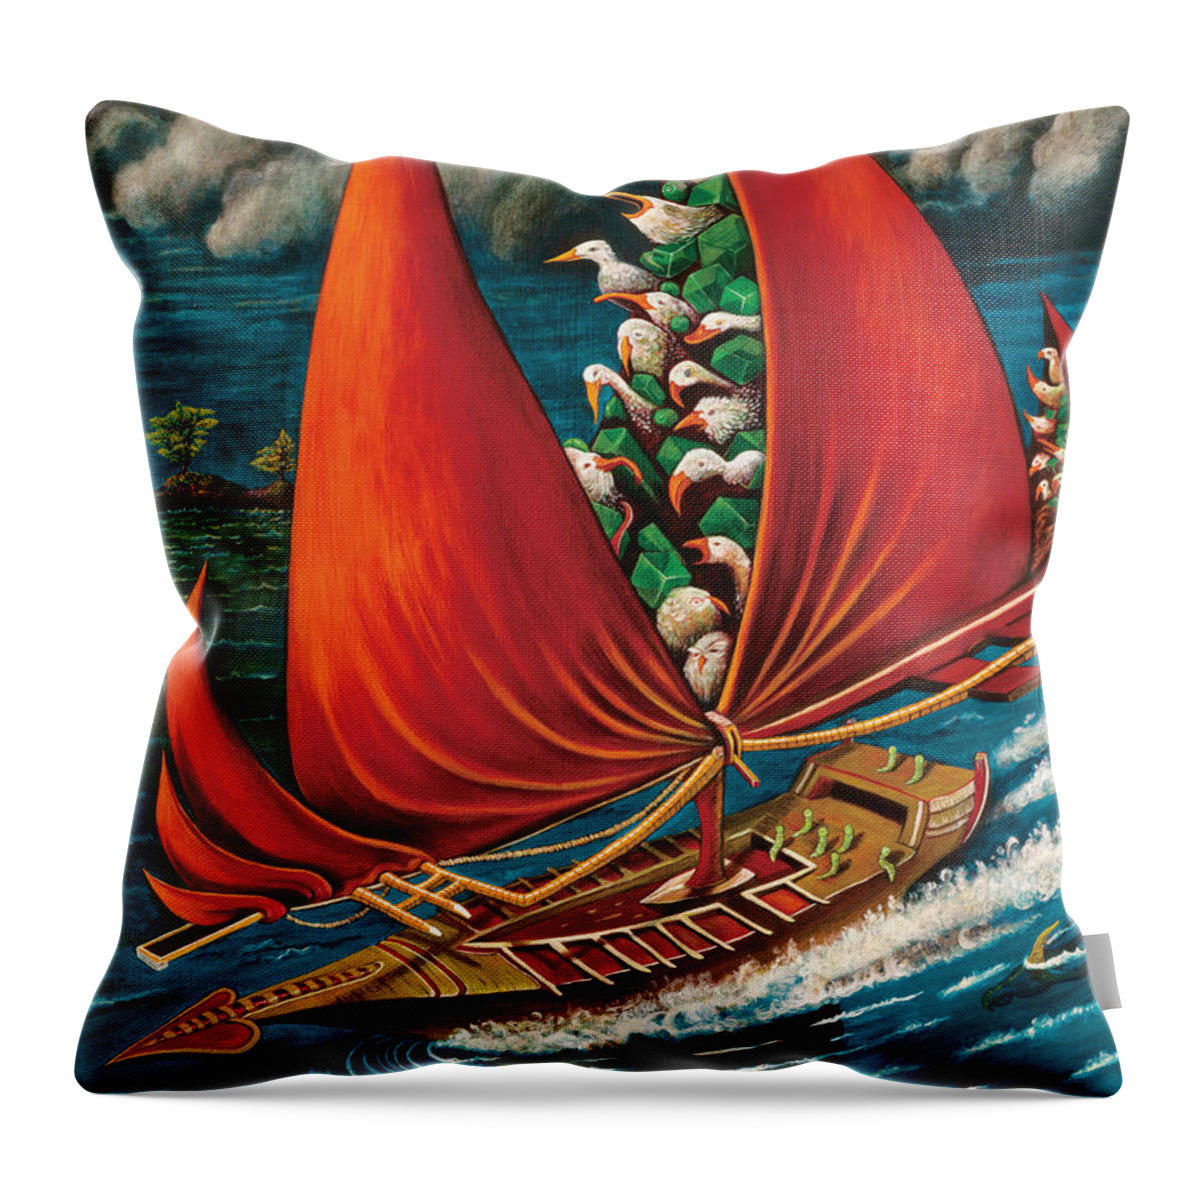 Boat Throw Pillow featuring the painting The Pulsation Station by Yom Tov Blumenthal